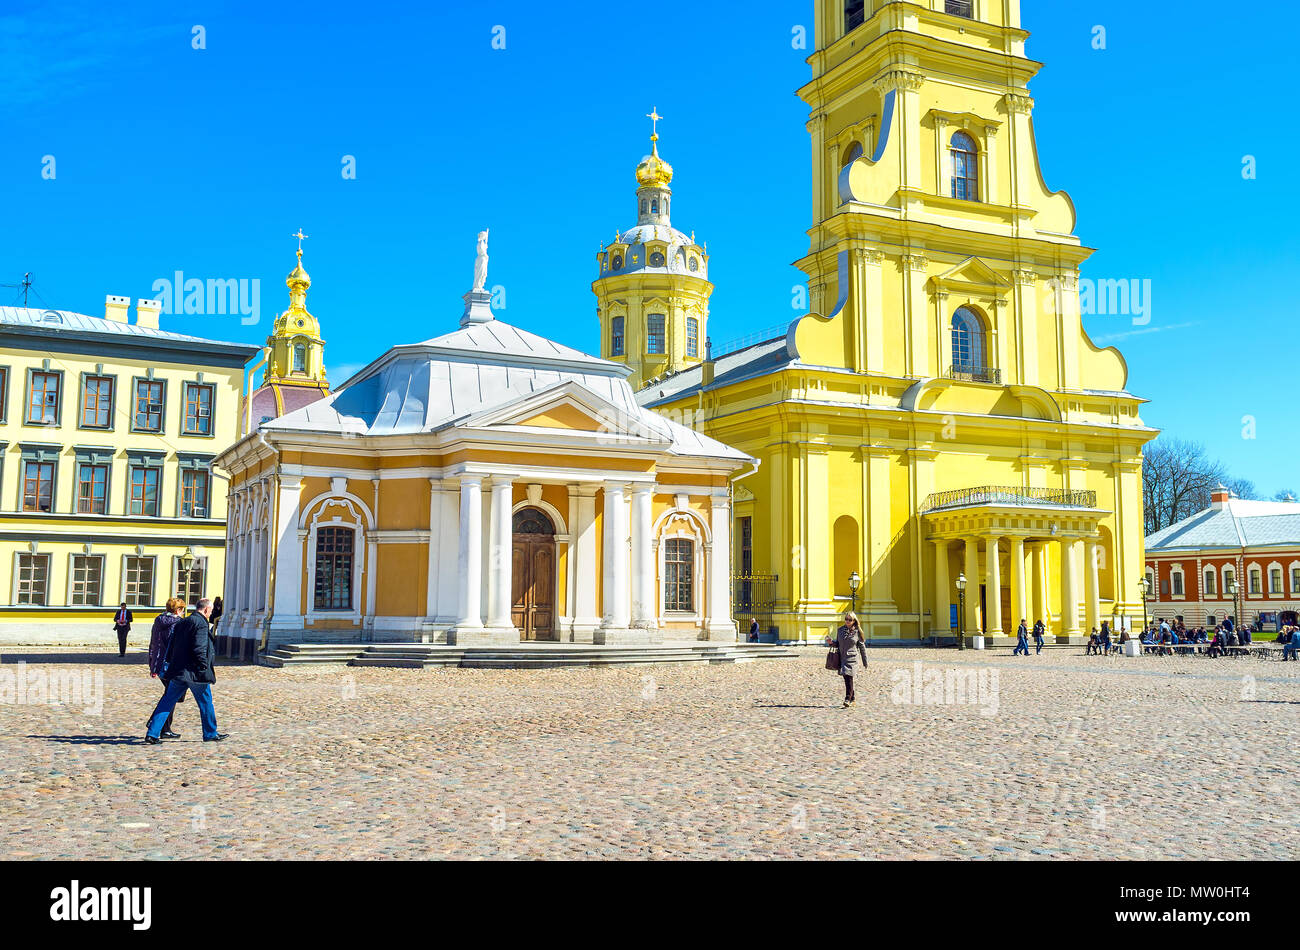 SAINT PETERSBURG, RUSSIA - APRIL 27, 2015:  Peter and Paul Citadel with its main square is one of the most beloved places in the city among tourists,  Stock Photo